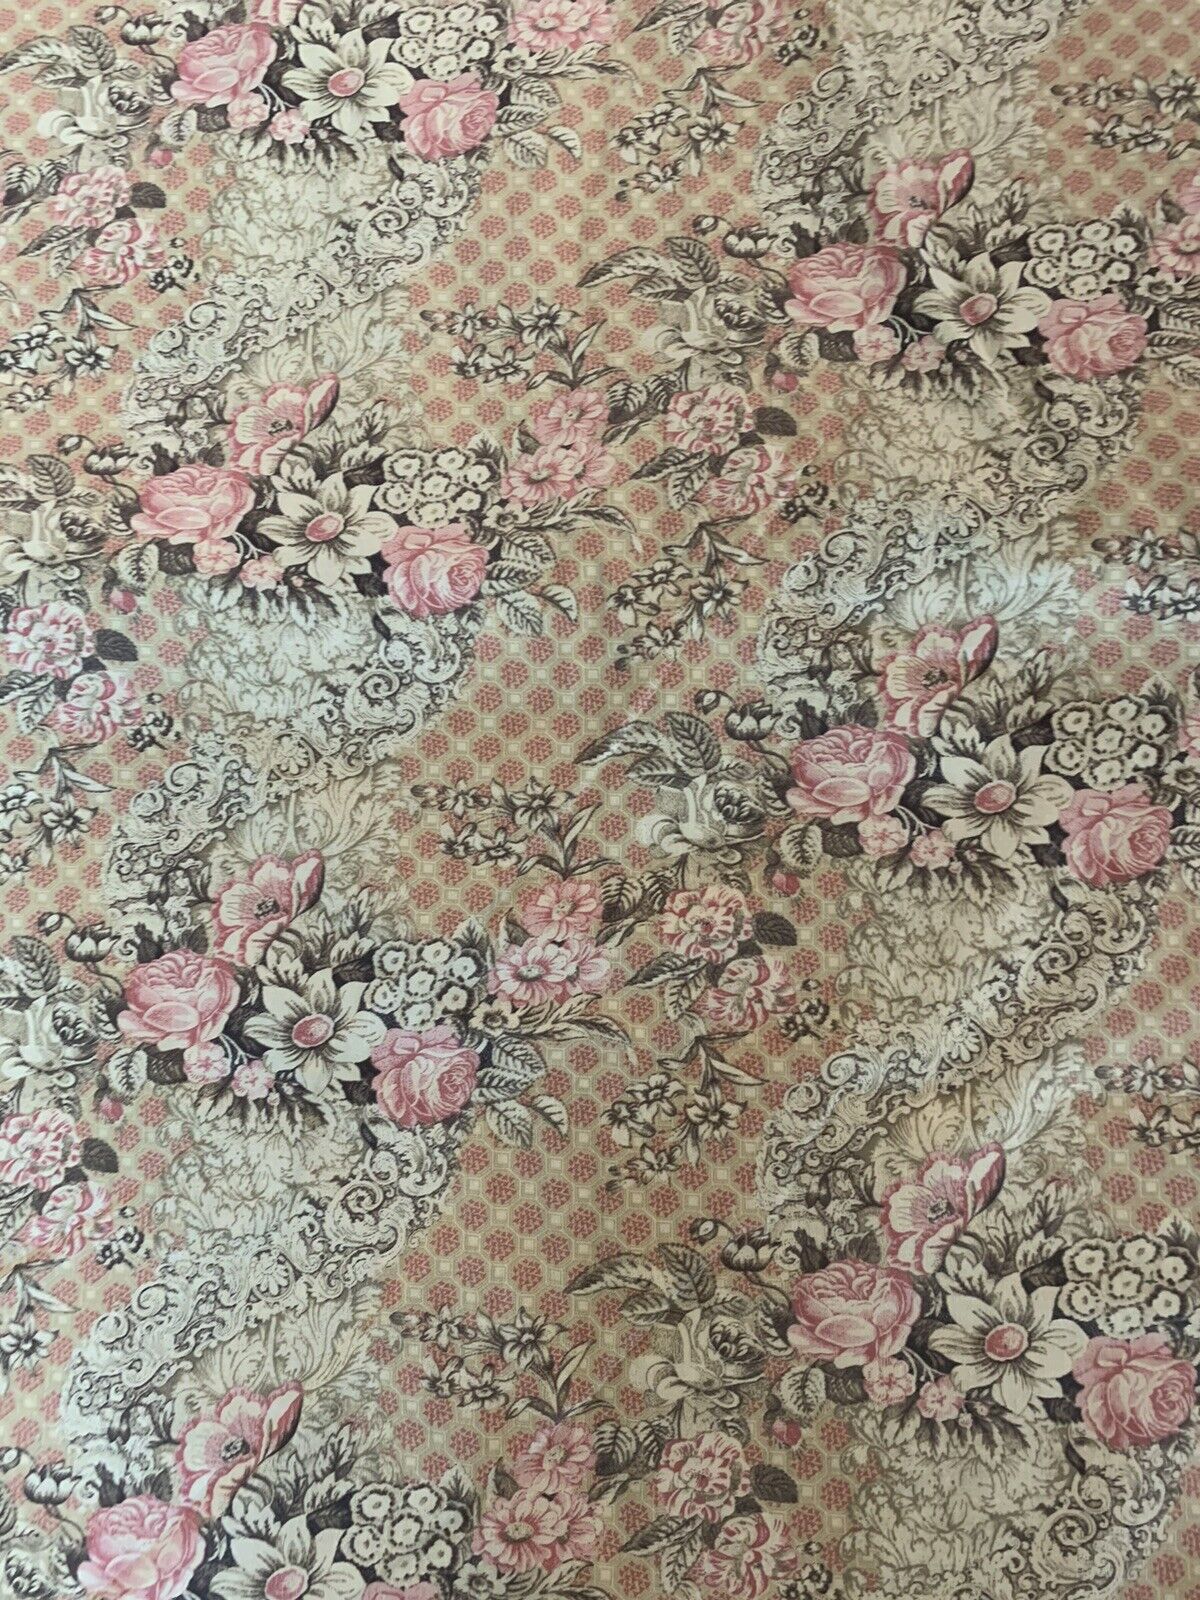 4 Yards Windham Decorator Fabric, Mary Koval Style #32677 Upholstery, Quilt Back